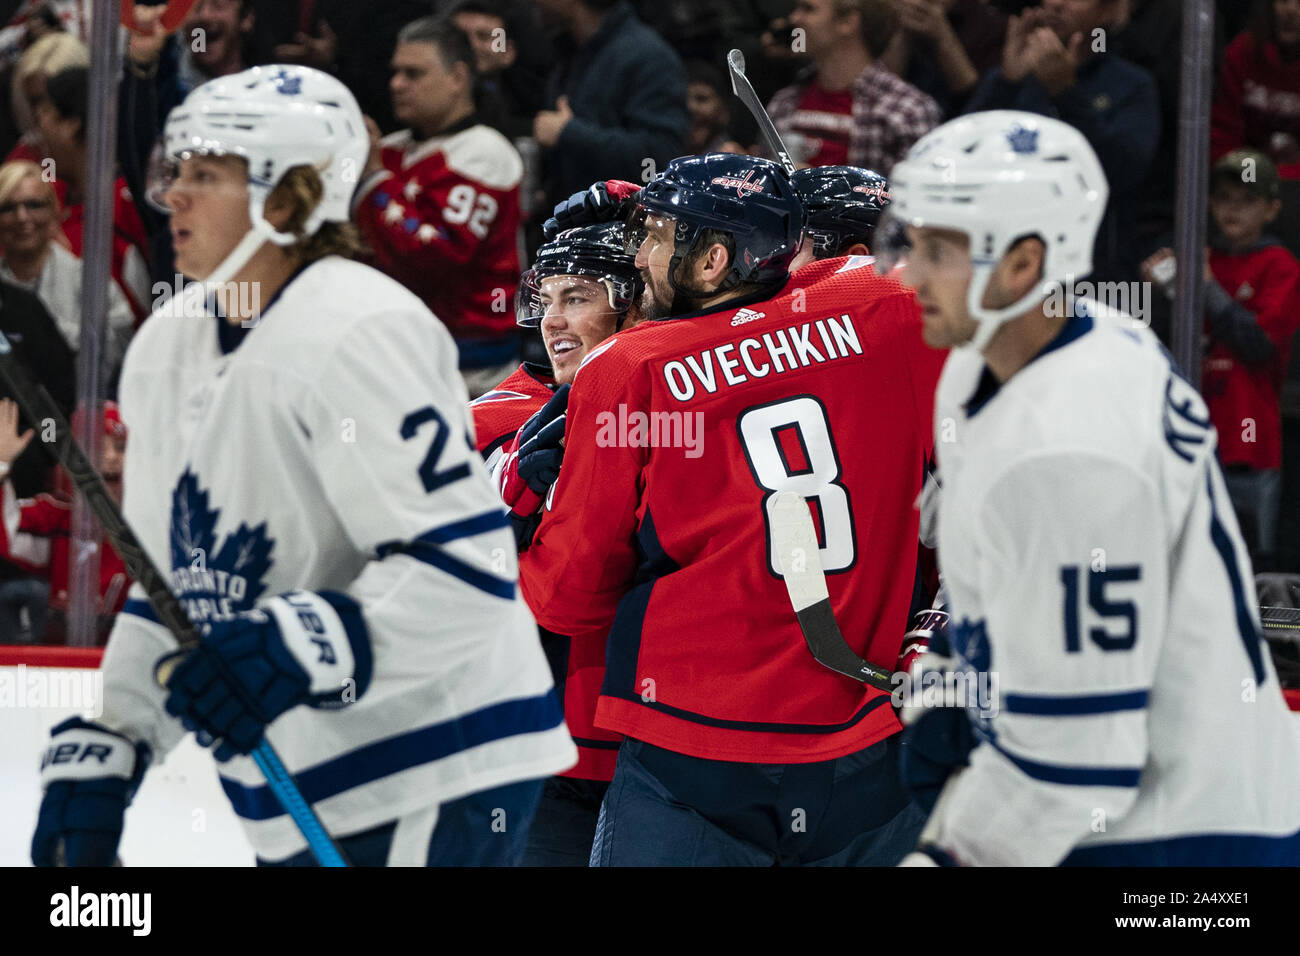 Washington, United States. 16th Oct, 2019. Washington Capitals left wing Alex Ovechkin (8) celebrates with teammates after a goal by Washington Capitals center Nicklas Backstrom, not pictured, during the second period at Capital One Arena in Washington, DC on Wednesday, October 16, 2019. The Capitals host the Toronto Maple Leafs to start a 3 game home stand tonight. Photo by Alex Edelman/UPI Credit: UPI/Alamy Live News Stock Photo